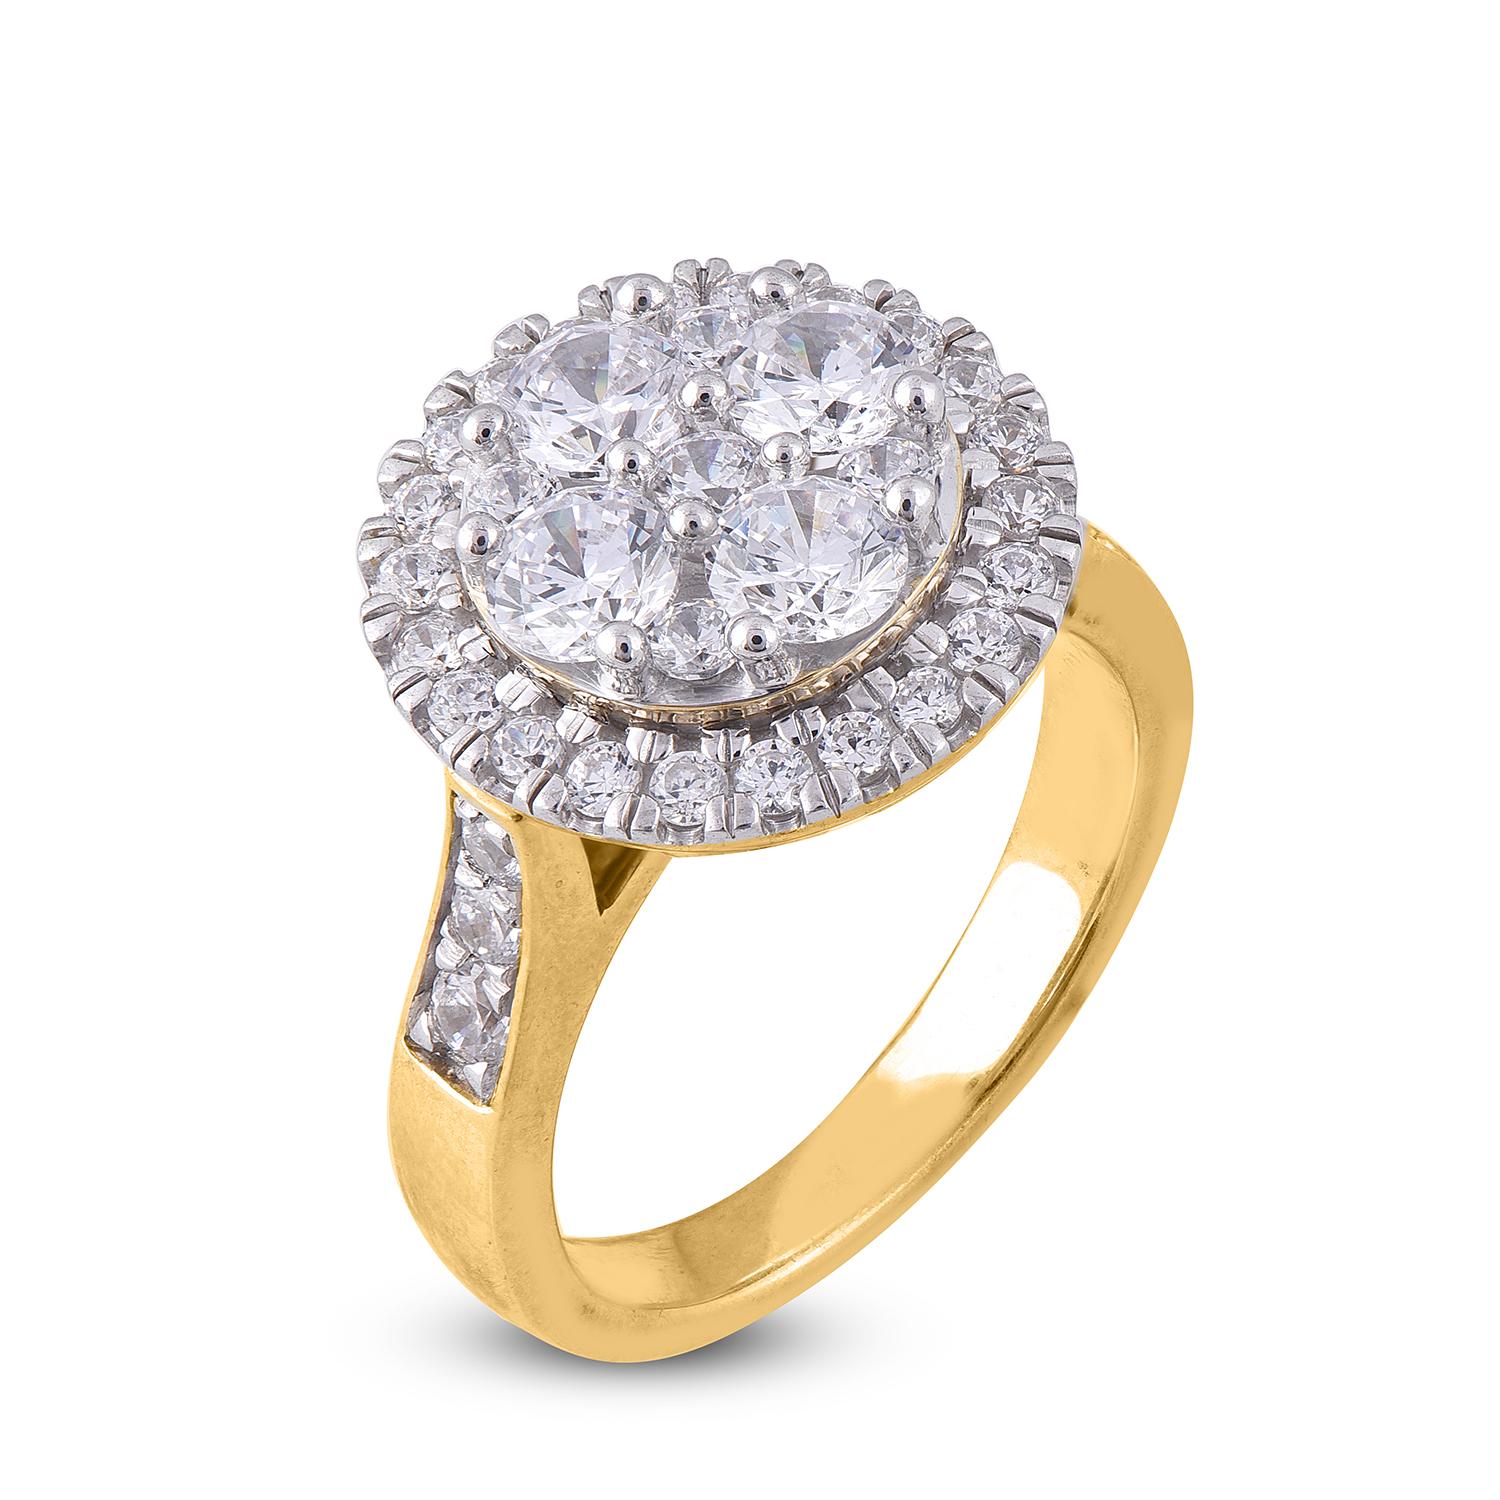 Handcrafted in 14 Karat yellow gold and studded with 37 round cut diamonds in prong and pressure setting. The diamonds are graded H-I Color, I2 Clarity. This ring is available in multiple sizes
